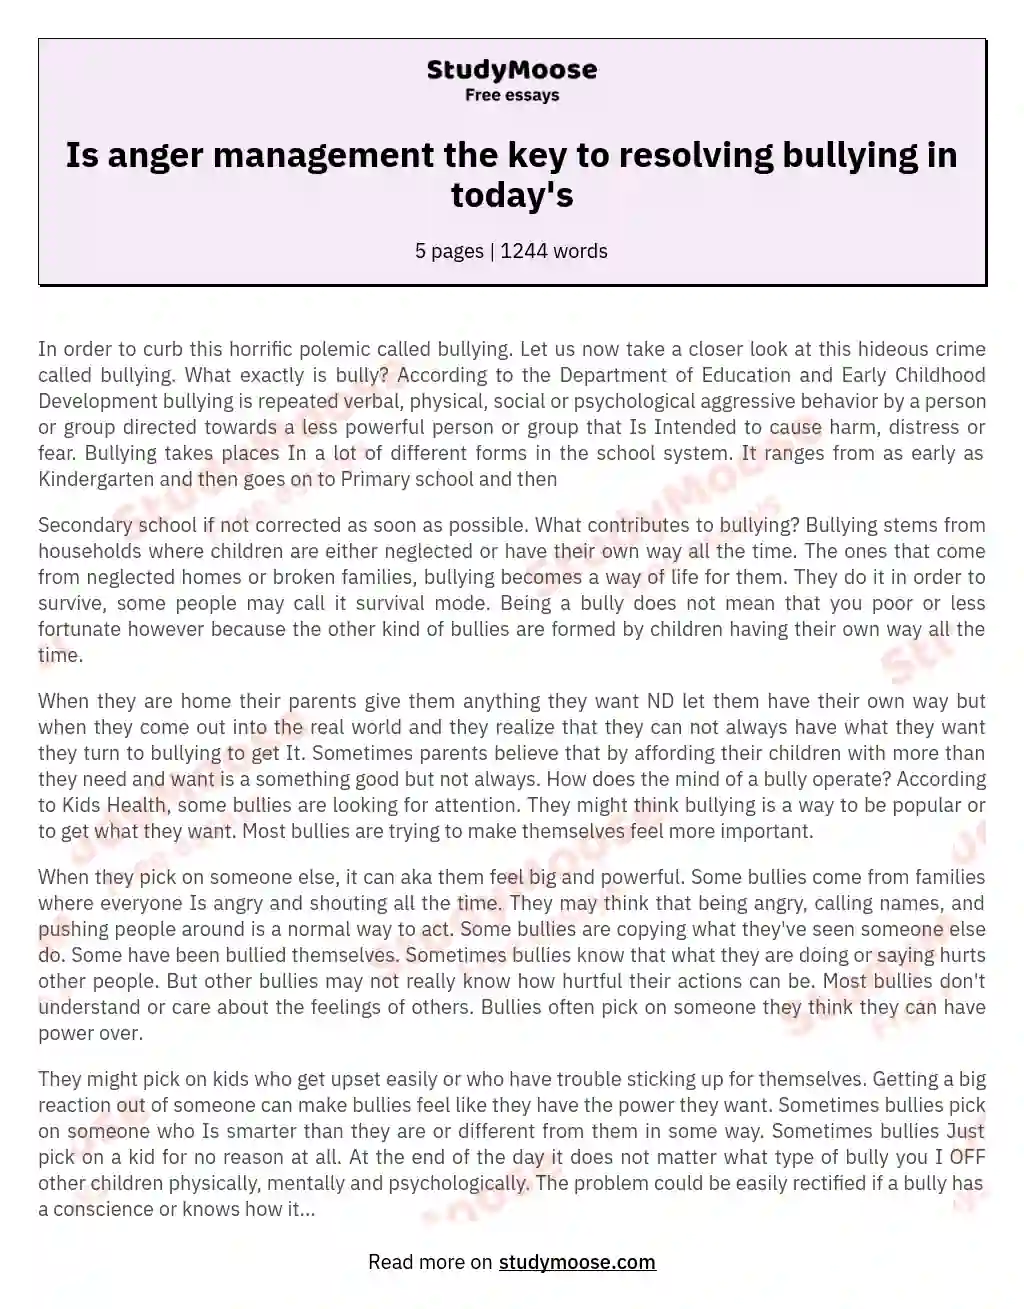 Is anger management the key to resolving bullying in today's essay